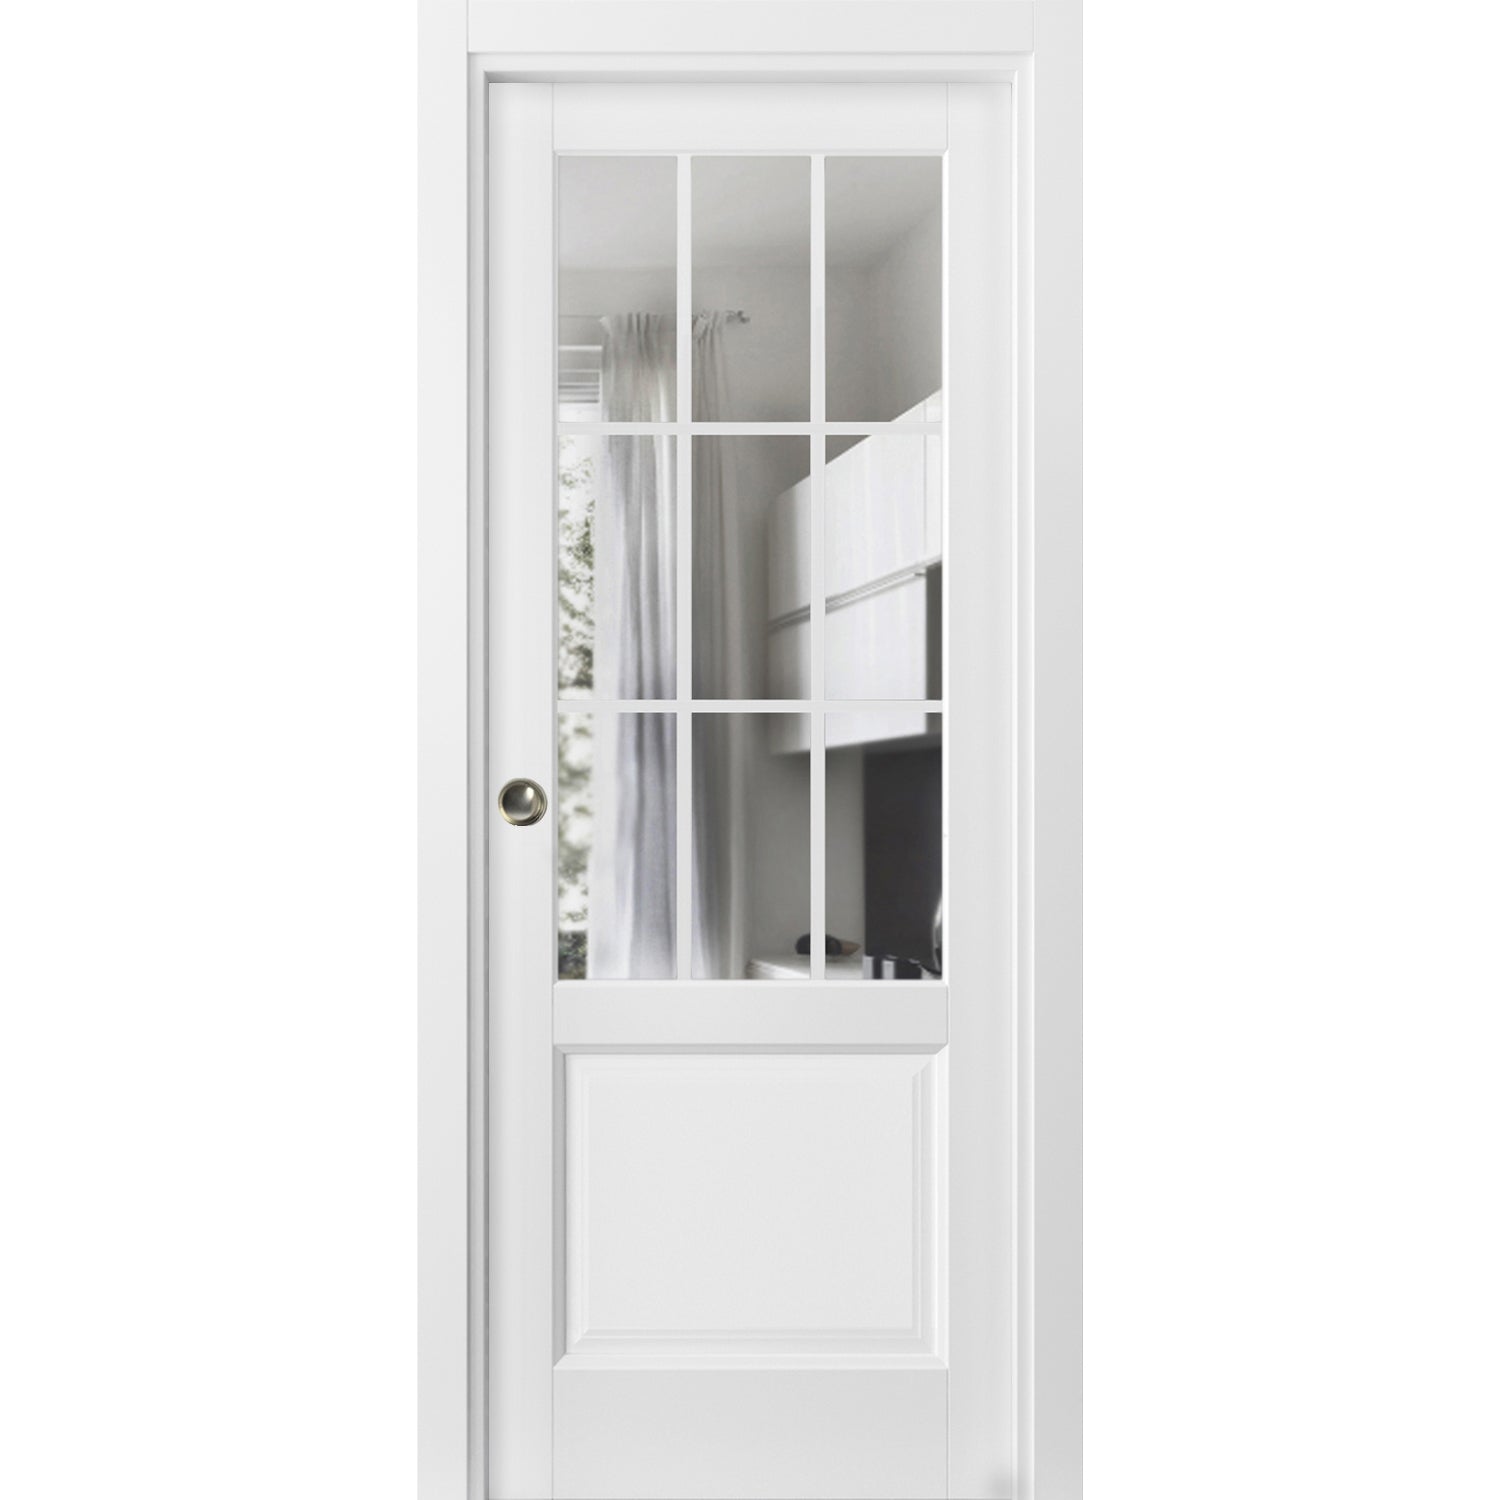 Sliding French Pocket Door with | Felicia 3599 White Silk with Clear Glass | Kit Trims Rail Hardware | Solid Wood Interior Bedroom Sturdy Doors-42